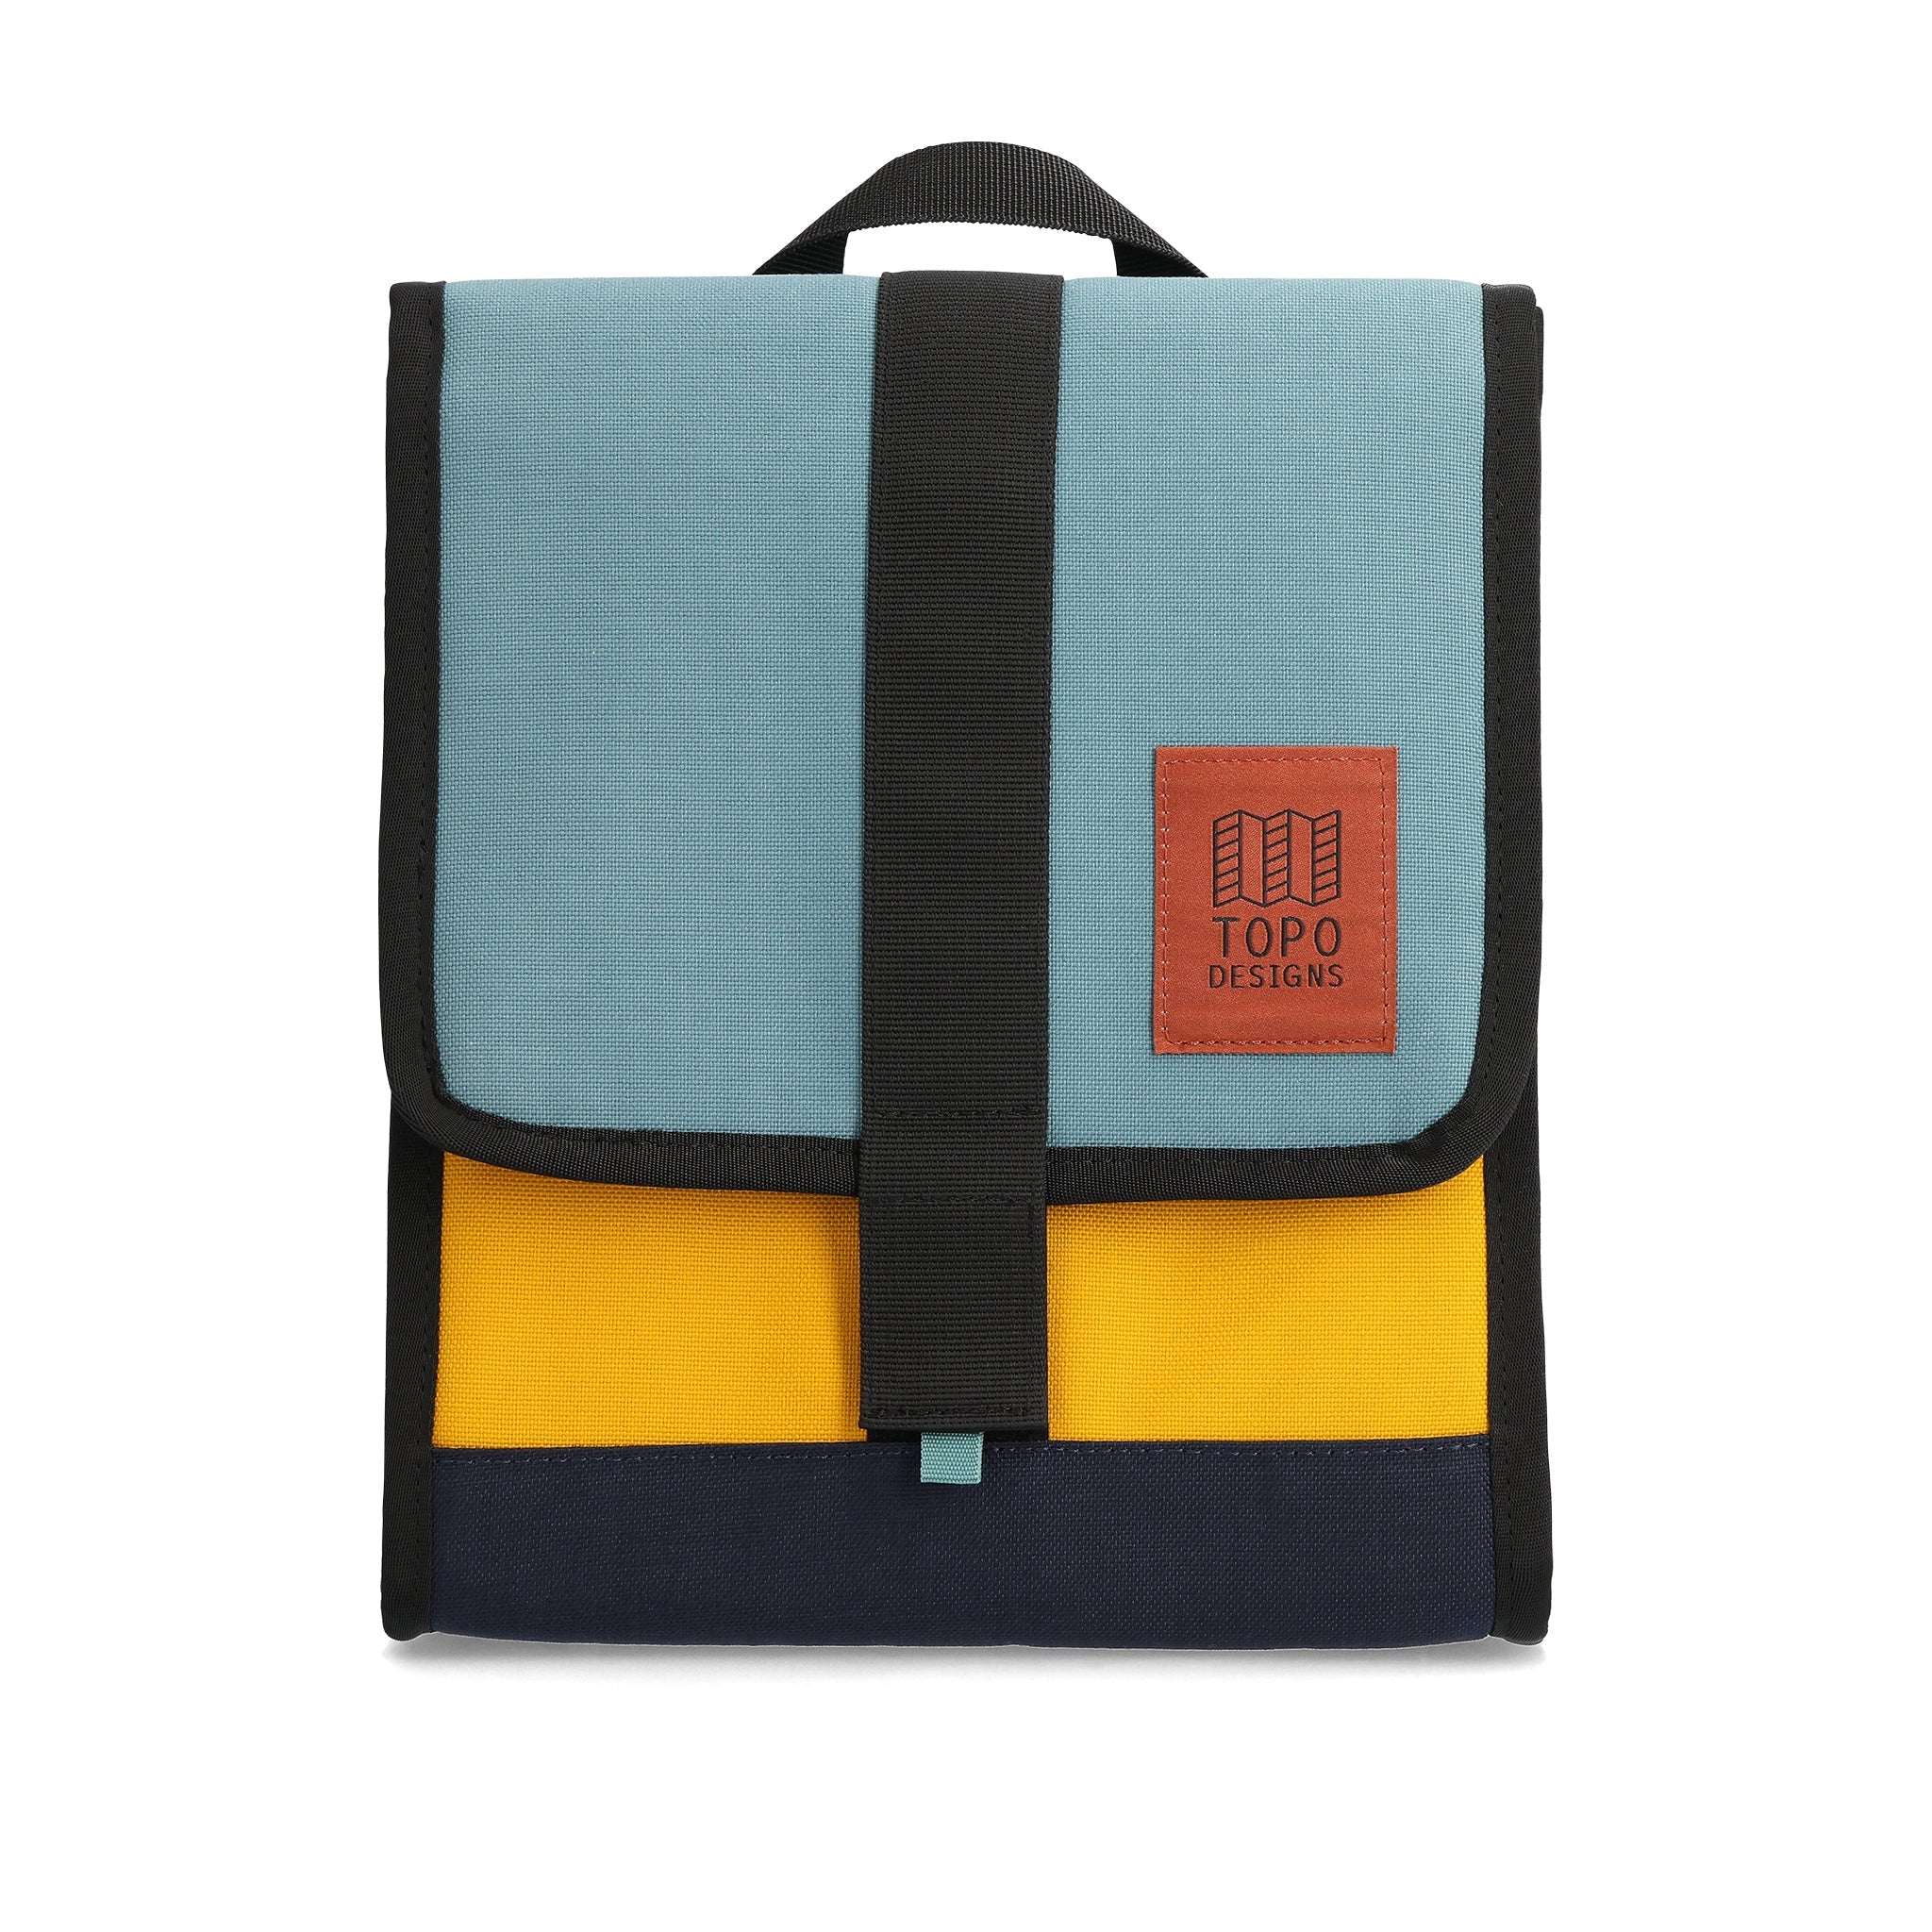 Front View of Topo Designs Cooler Bag  in "Sea Pine / Mustard"